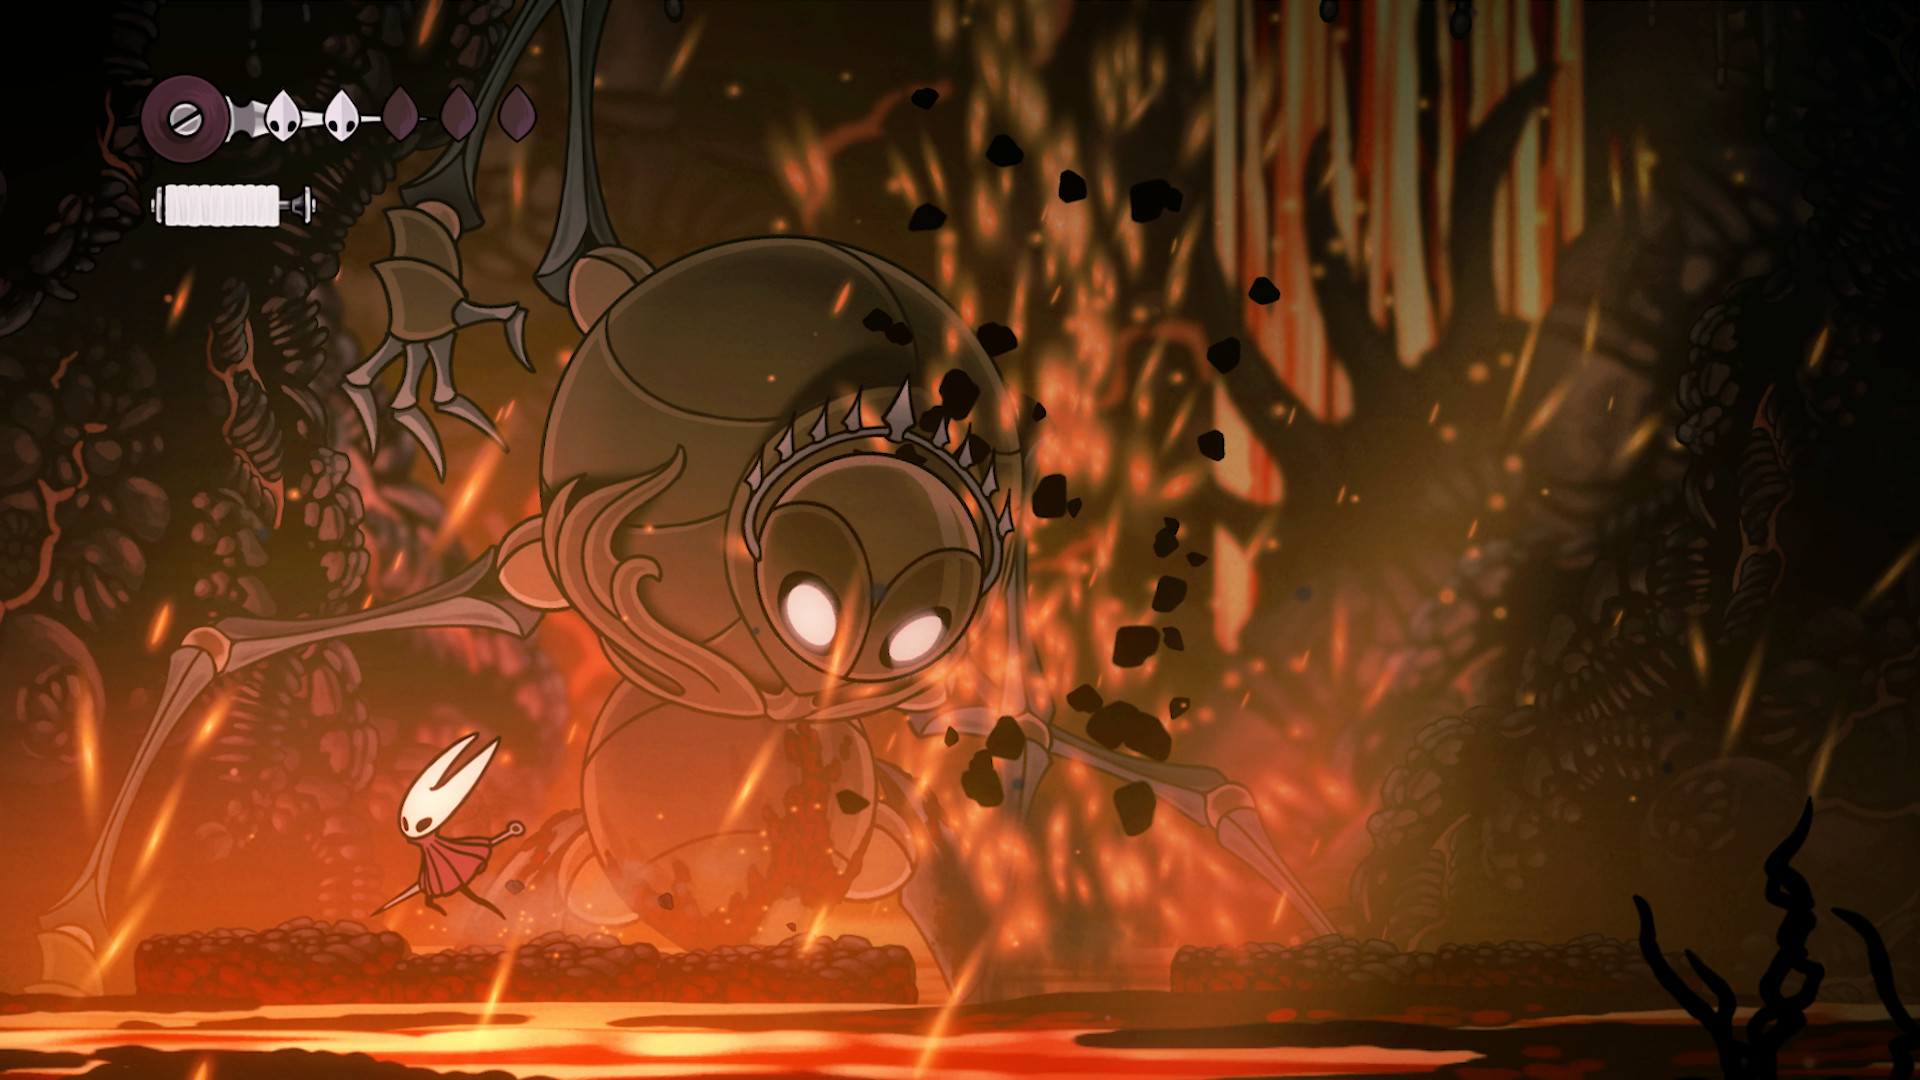 Hollow Knight: Silksong is coming to Xbox Series X